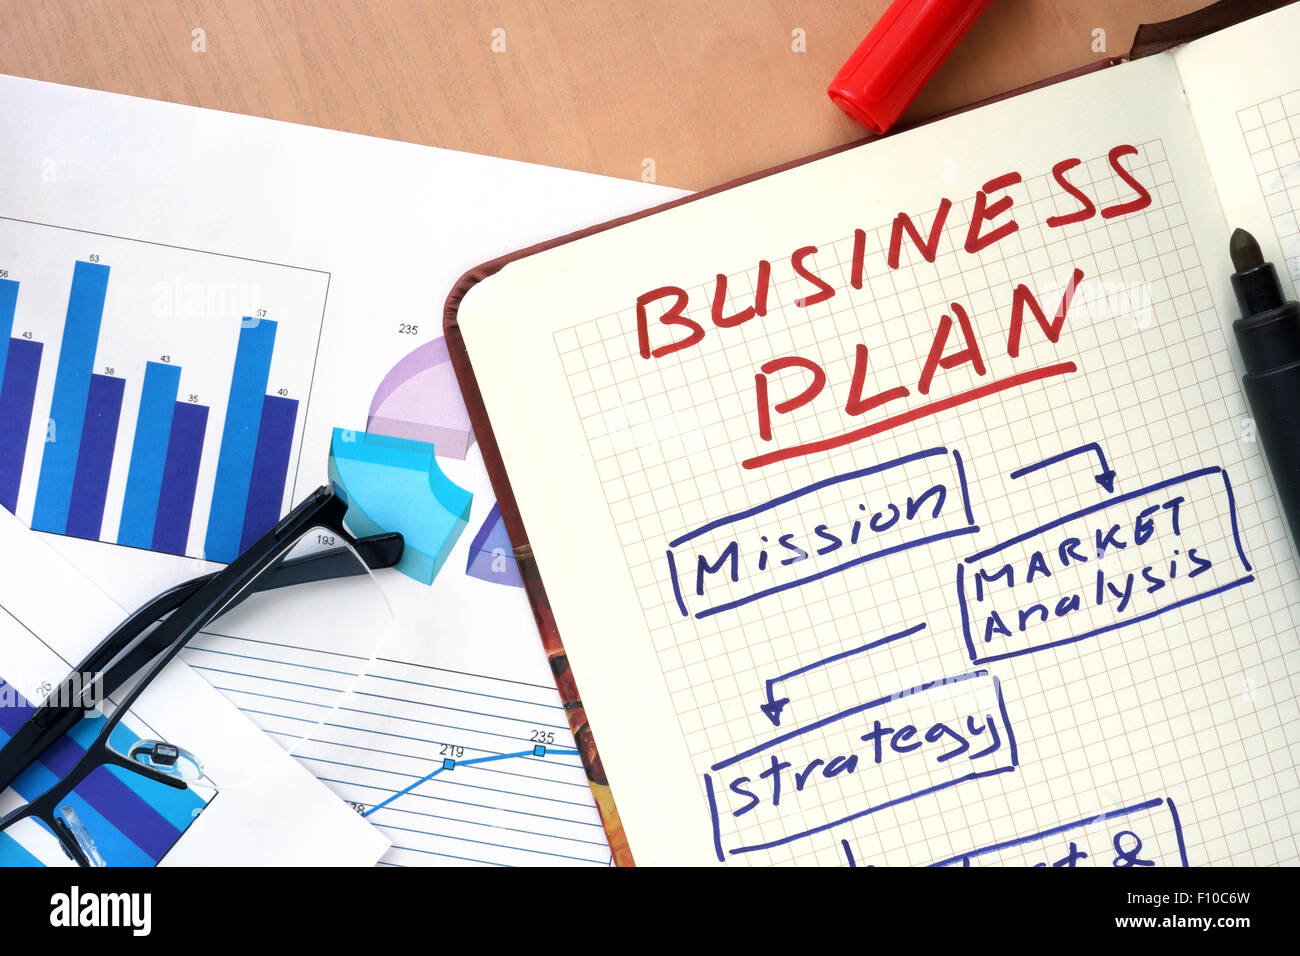 The best example of executive summary for business plan can be found here.